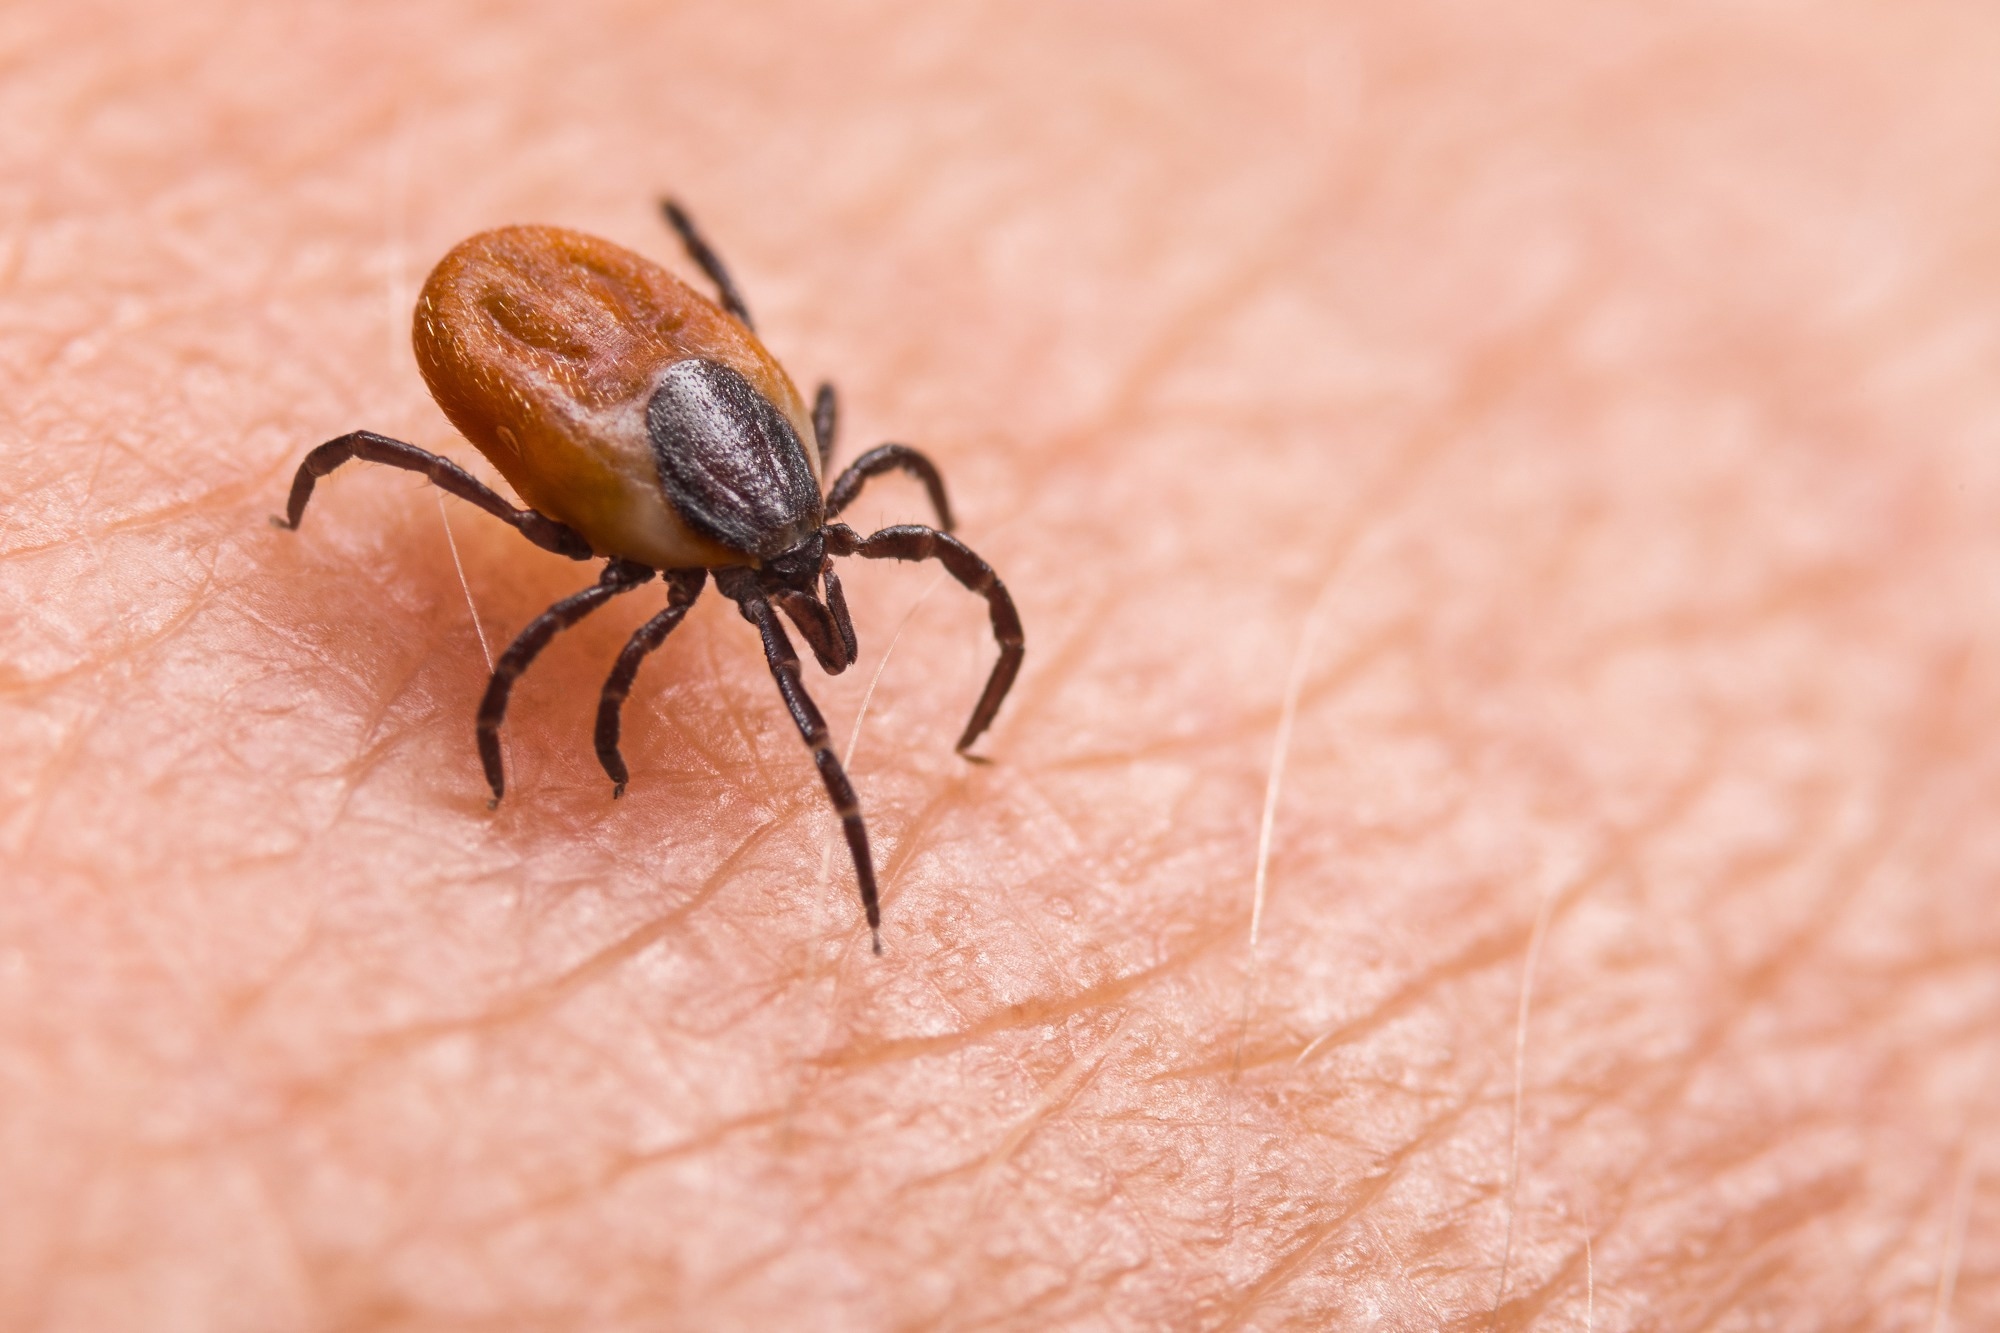 Study: Ticks harbor and excrete chronic wasting disease prions. Image Credit: KPixMining/Shutterstock.com